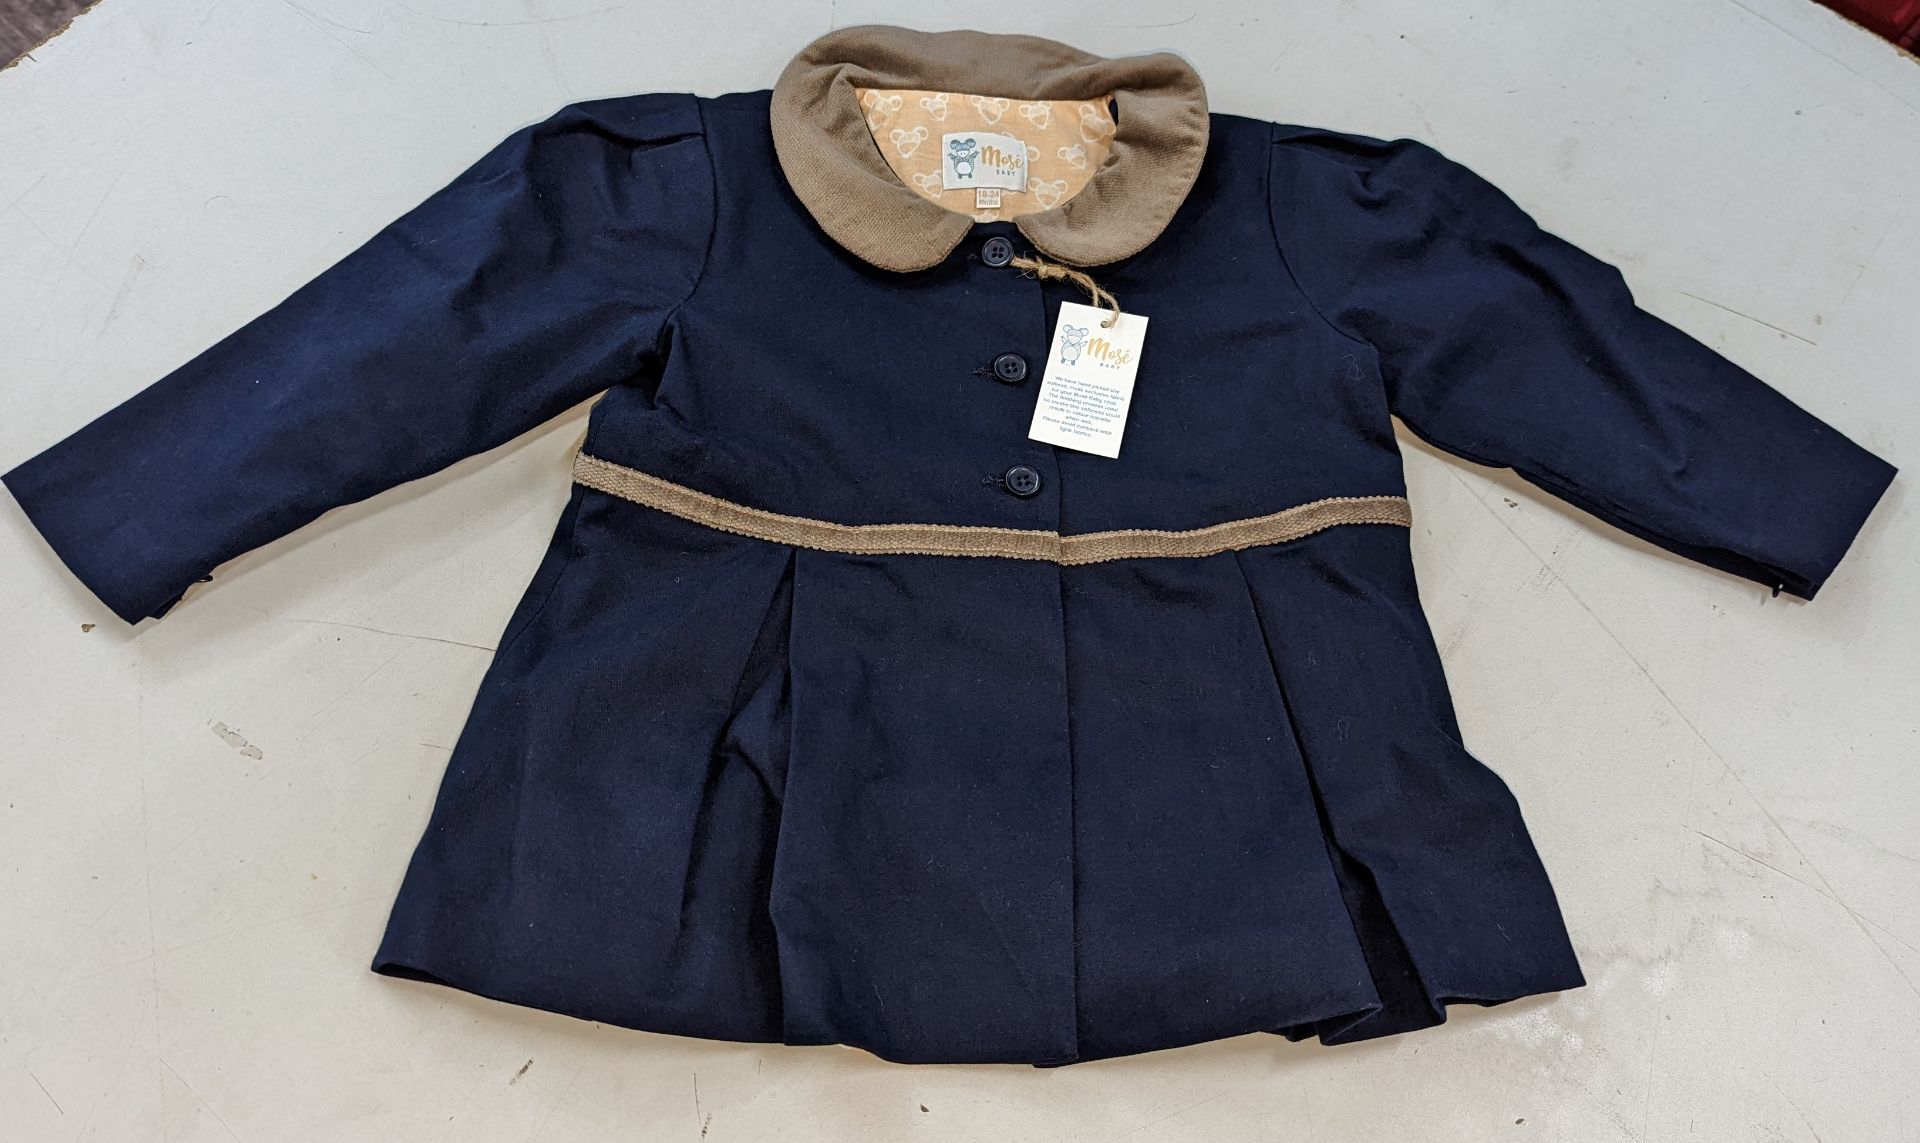 20 off Mosé Baby girl's dress coats in navy, with skirted design, velvet collar and waist trim plus